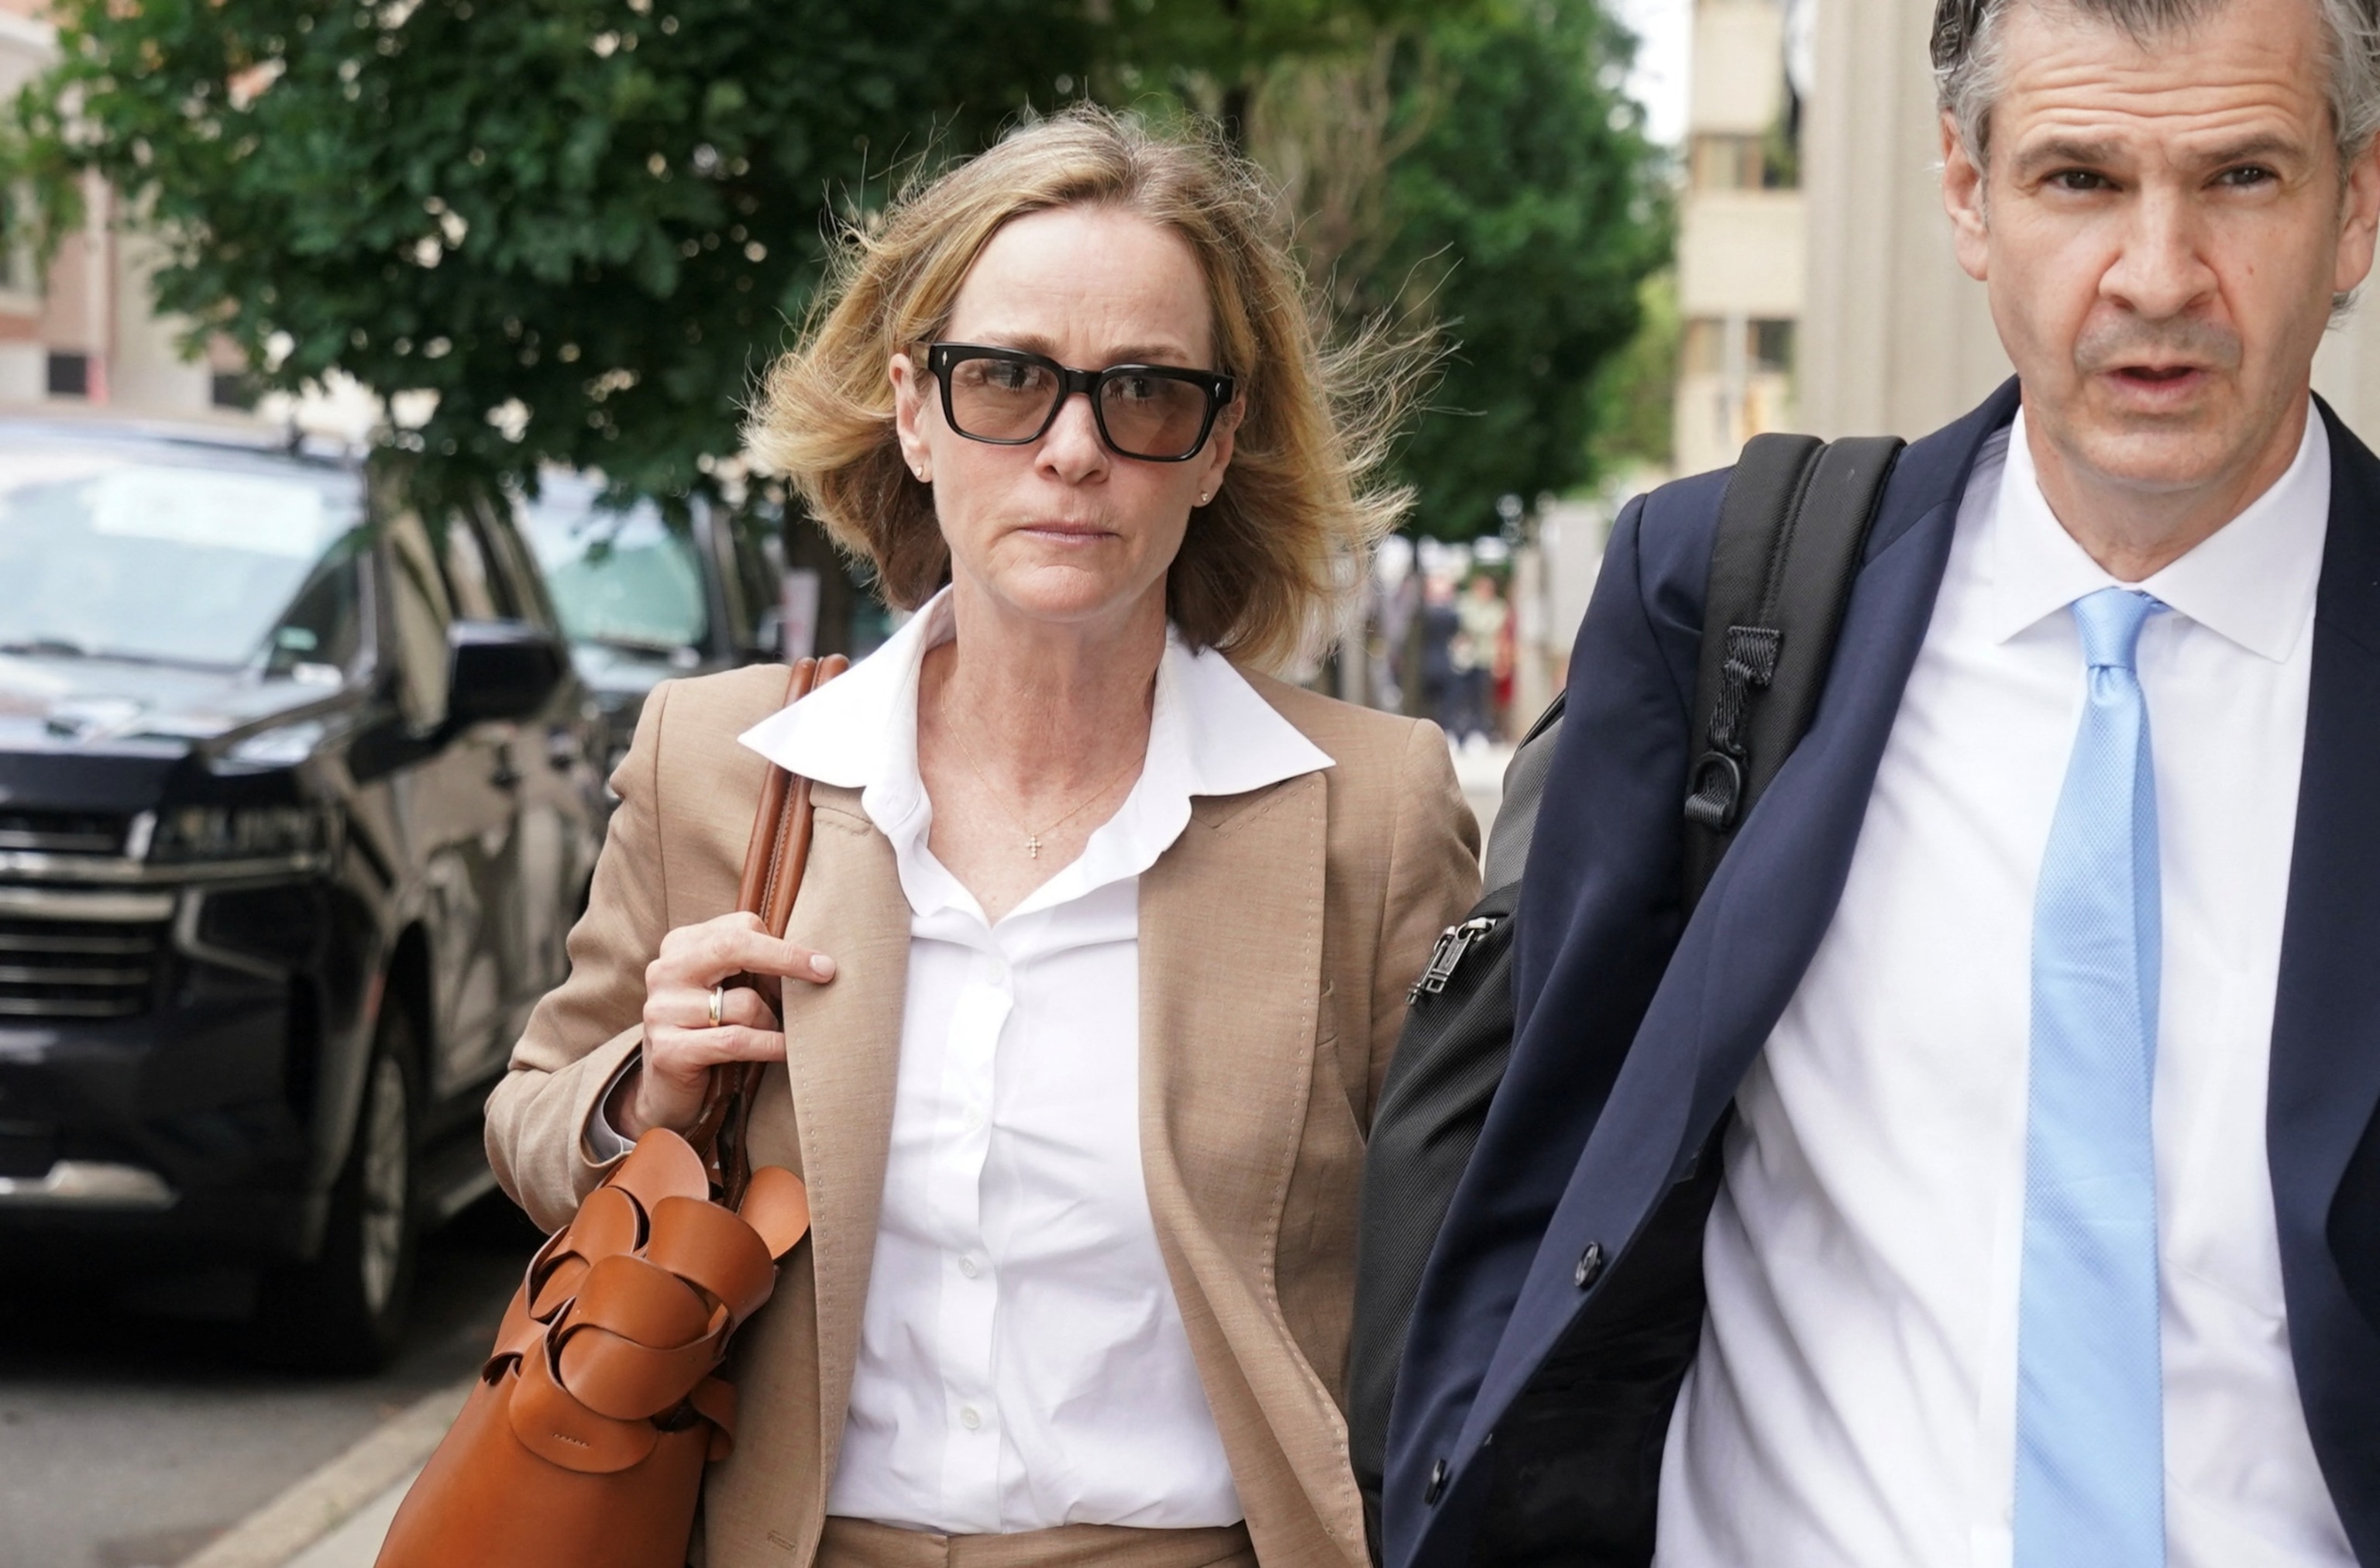 PHOTO: Hunter Biden's former wife, Kathleen Buhle departs the federal courthouse after taking the stand during the trial of Hunter Biden, son of President Joe Biden, on criminal gun charges in Wilmington, Del., June 5, 2024.